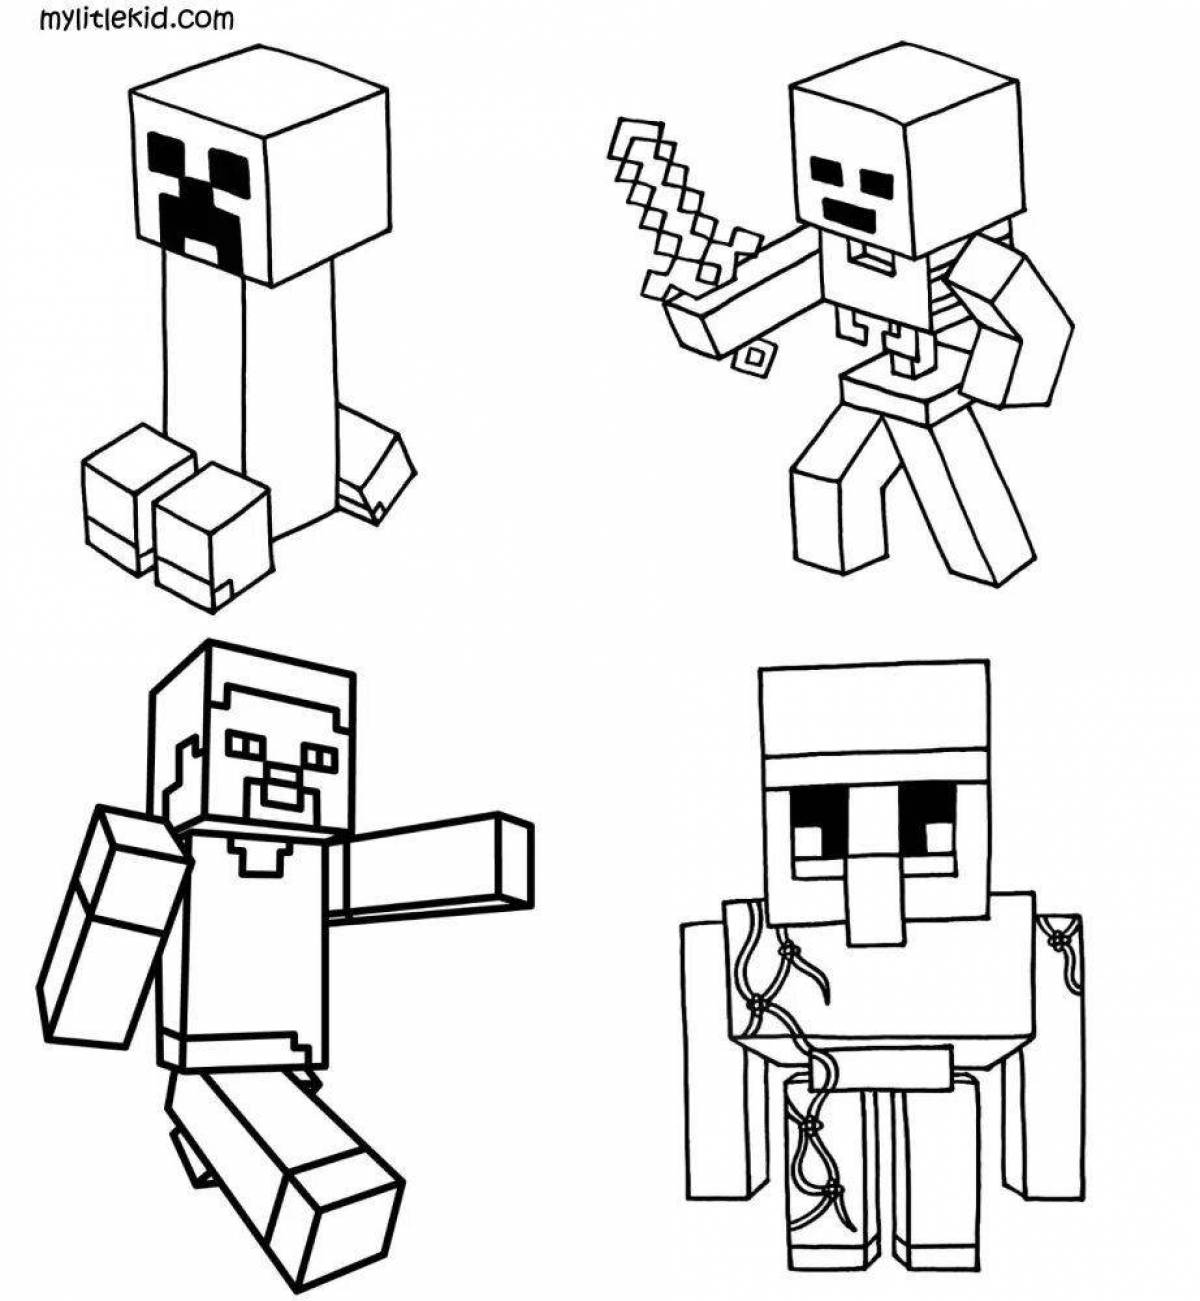 Color-frenzy alex and steve minecraft coloring page